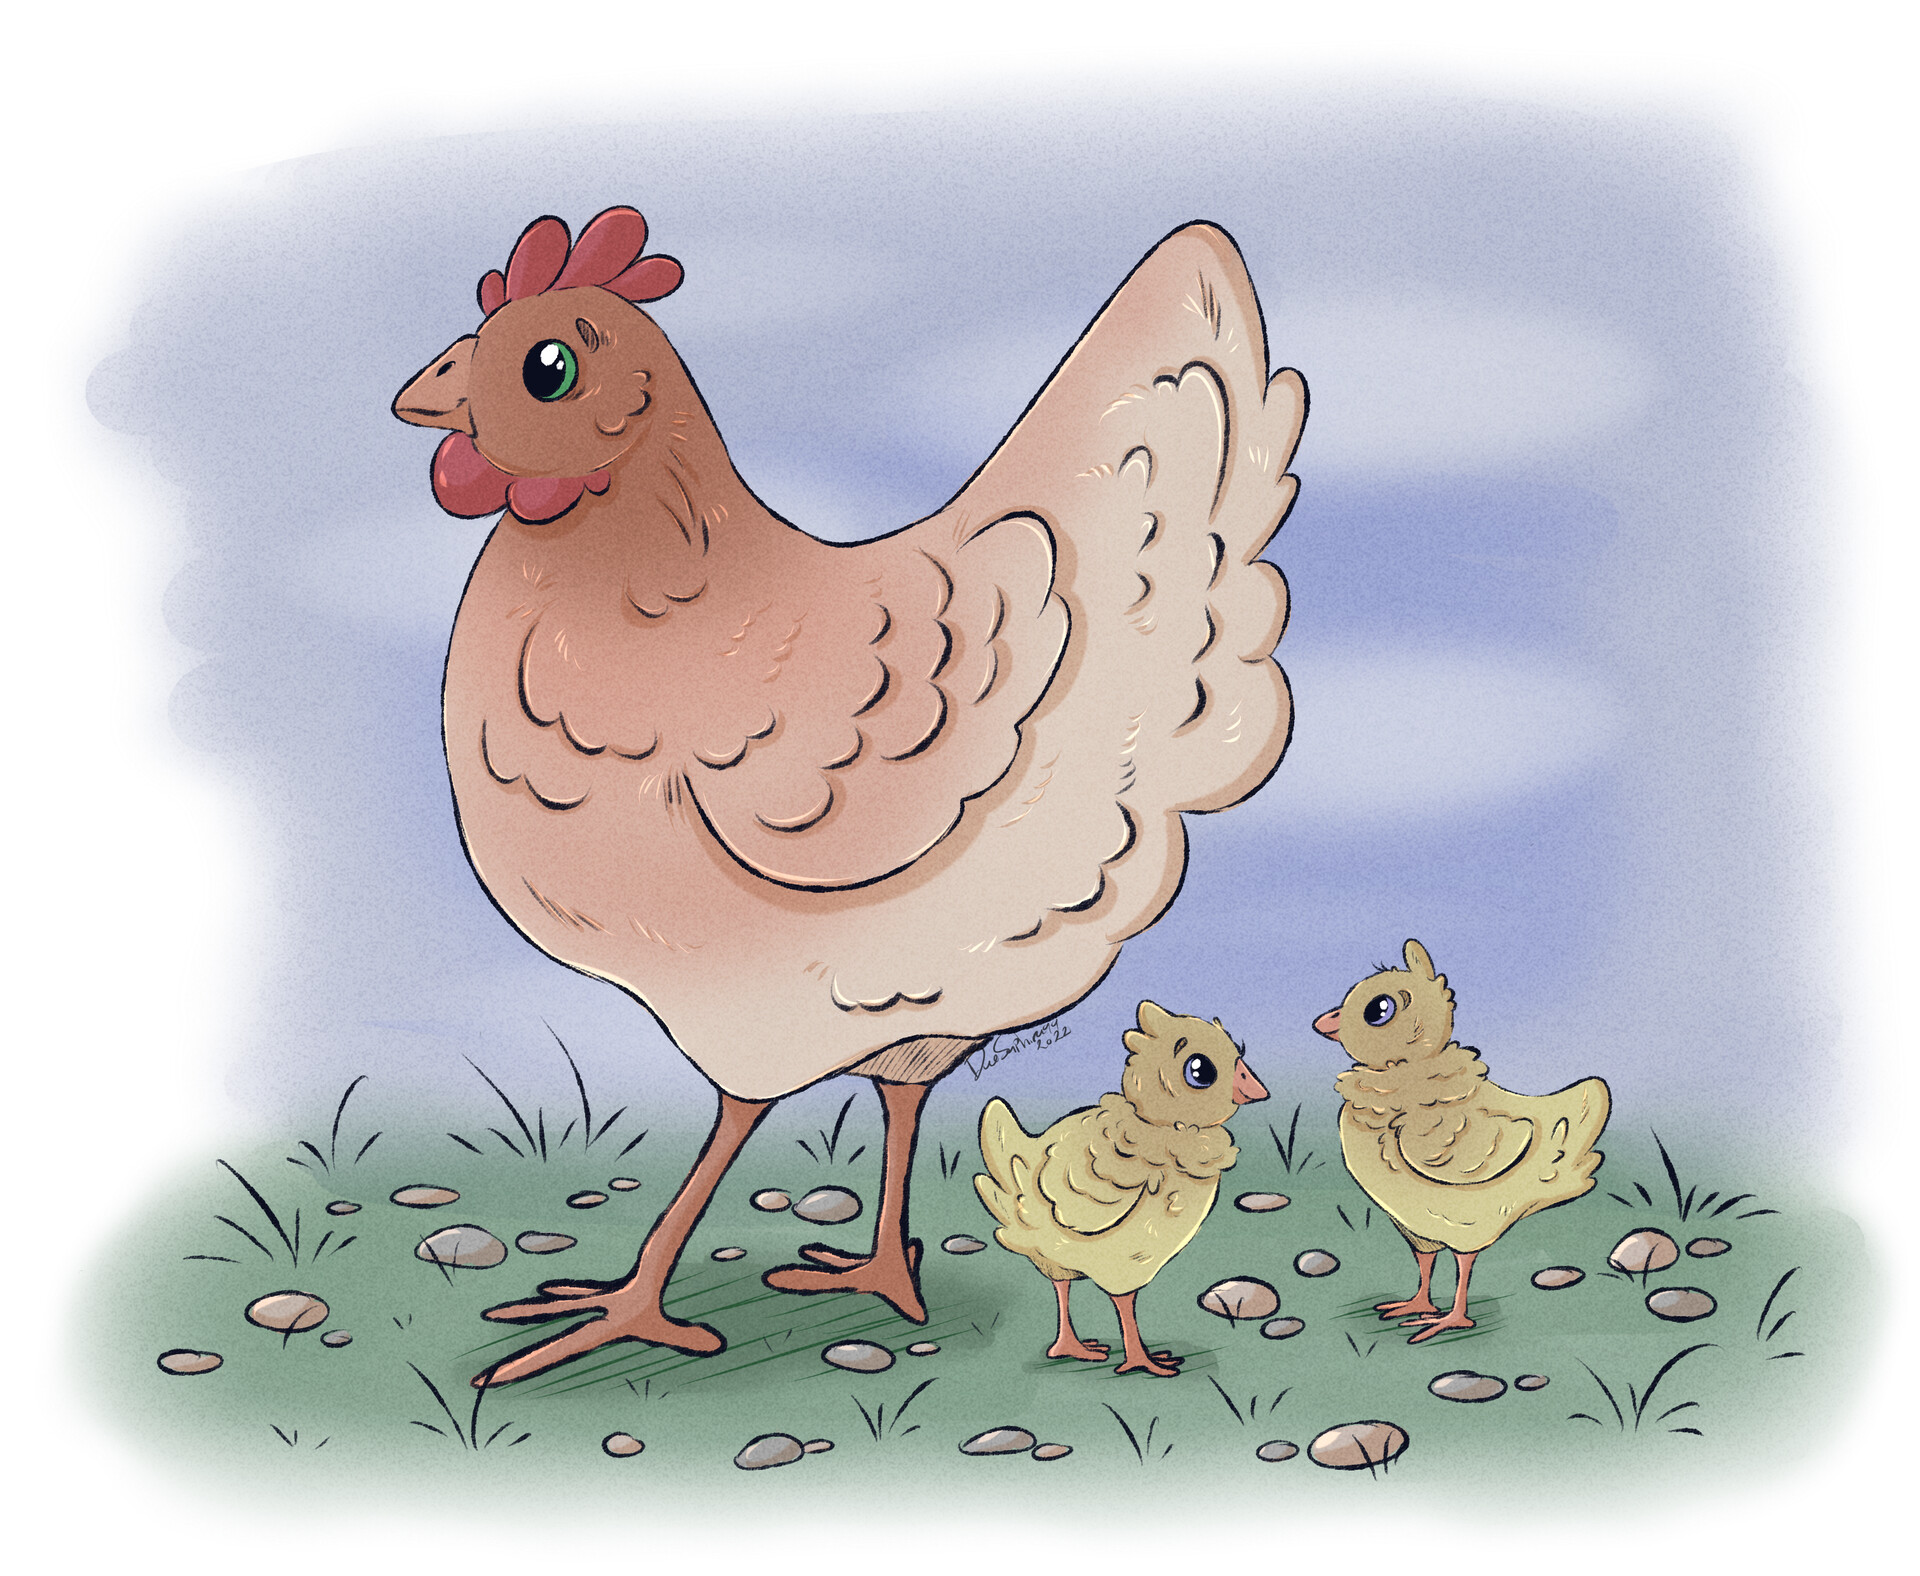 https://cdnb.artstation.com/p/assets/images/images/049/724/585/large/victoria-gustavsson-chicken-mom-with-her-chicks.jpg?1653166124